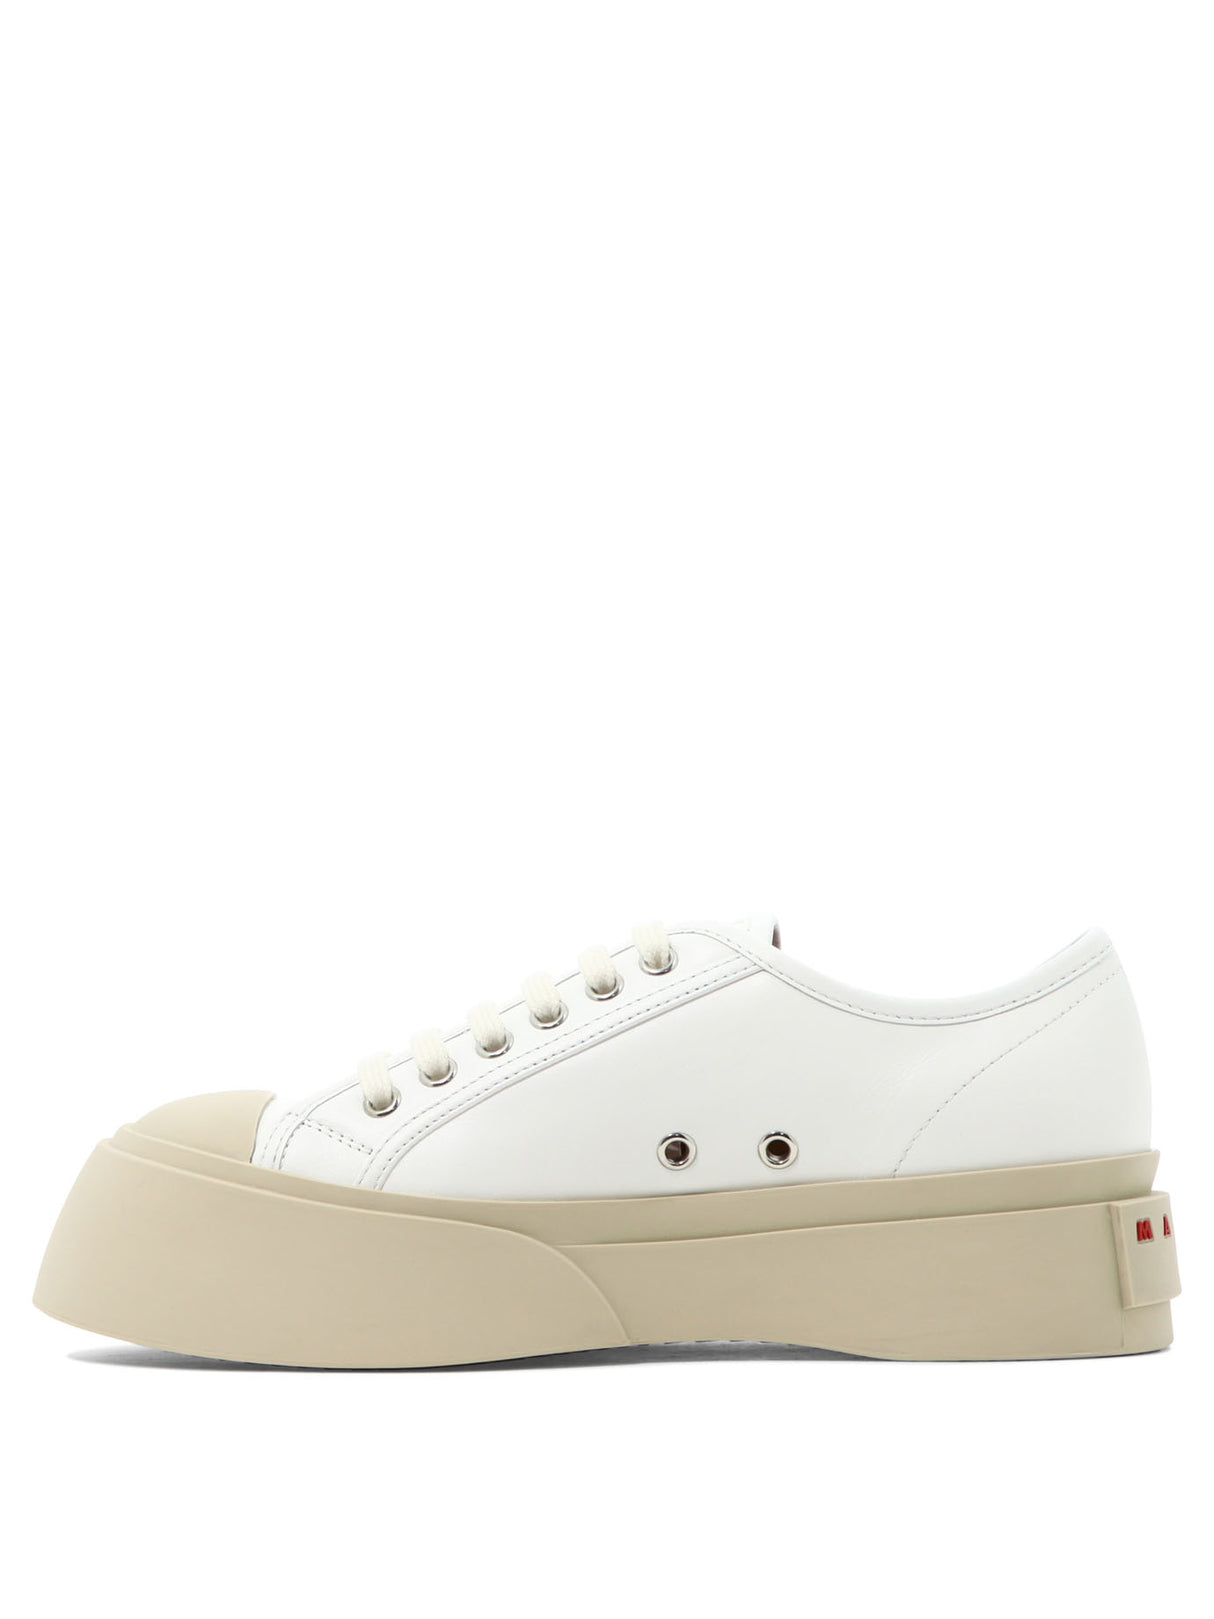 MARNI White Leather Sneakers for Women - FW24 Collection